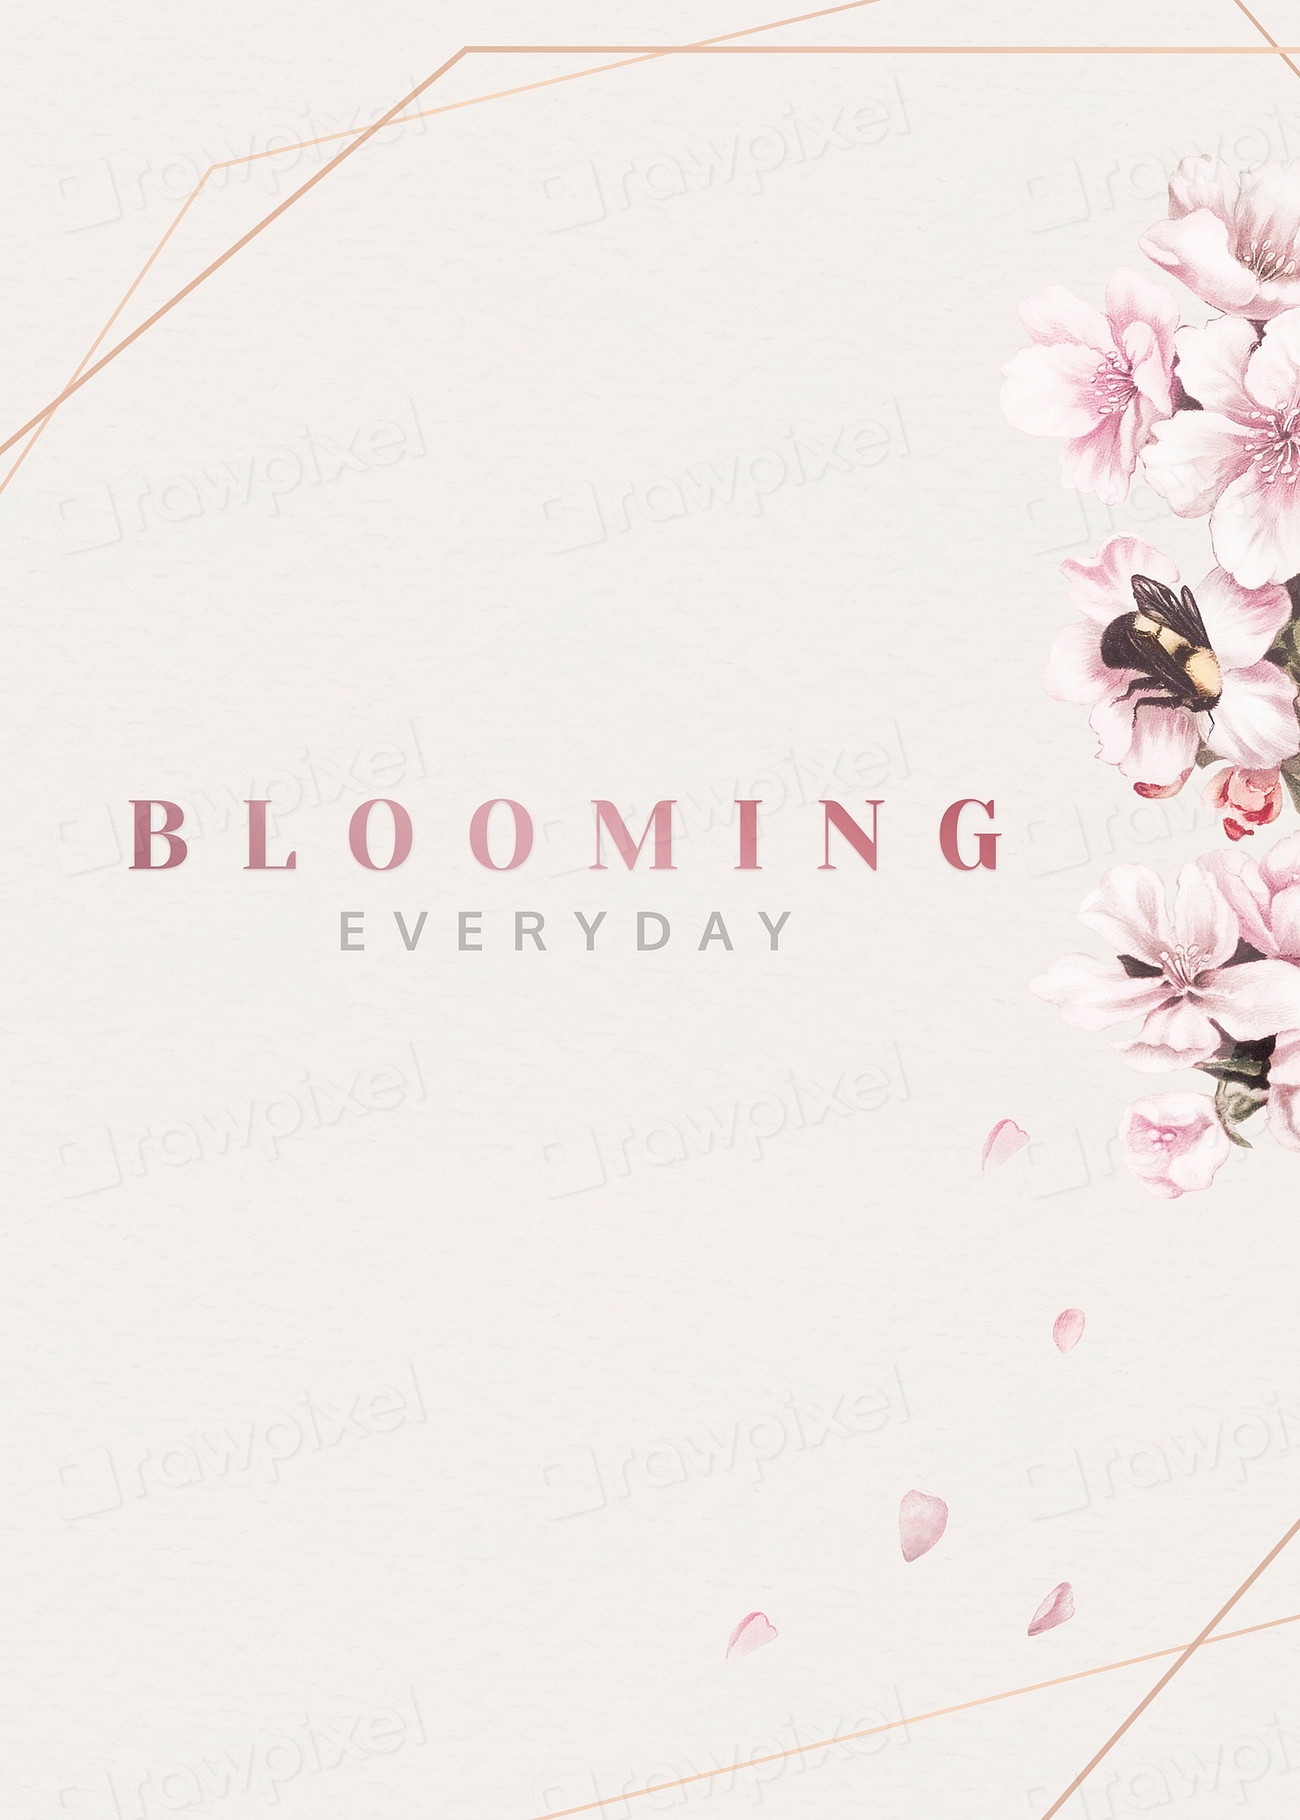 Blooming everyday floral frame illustration | Premium PSD - rawpixel